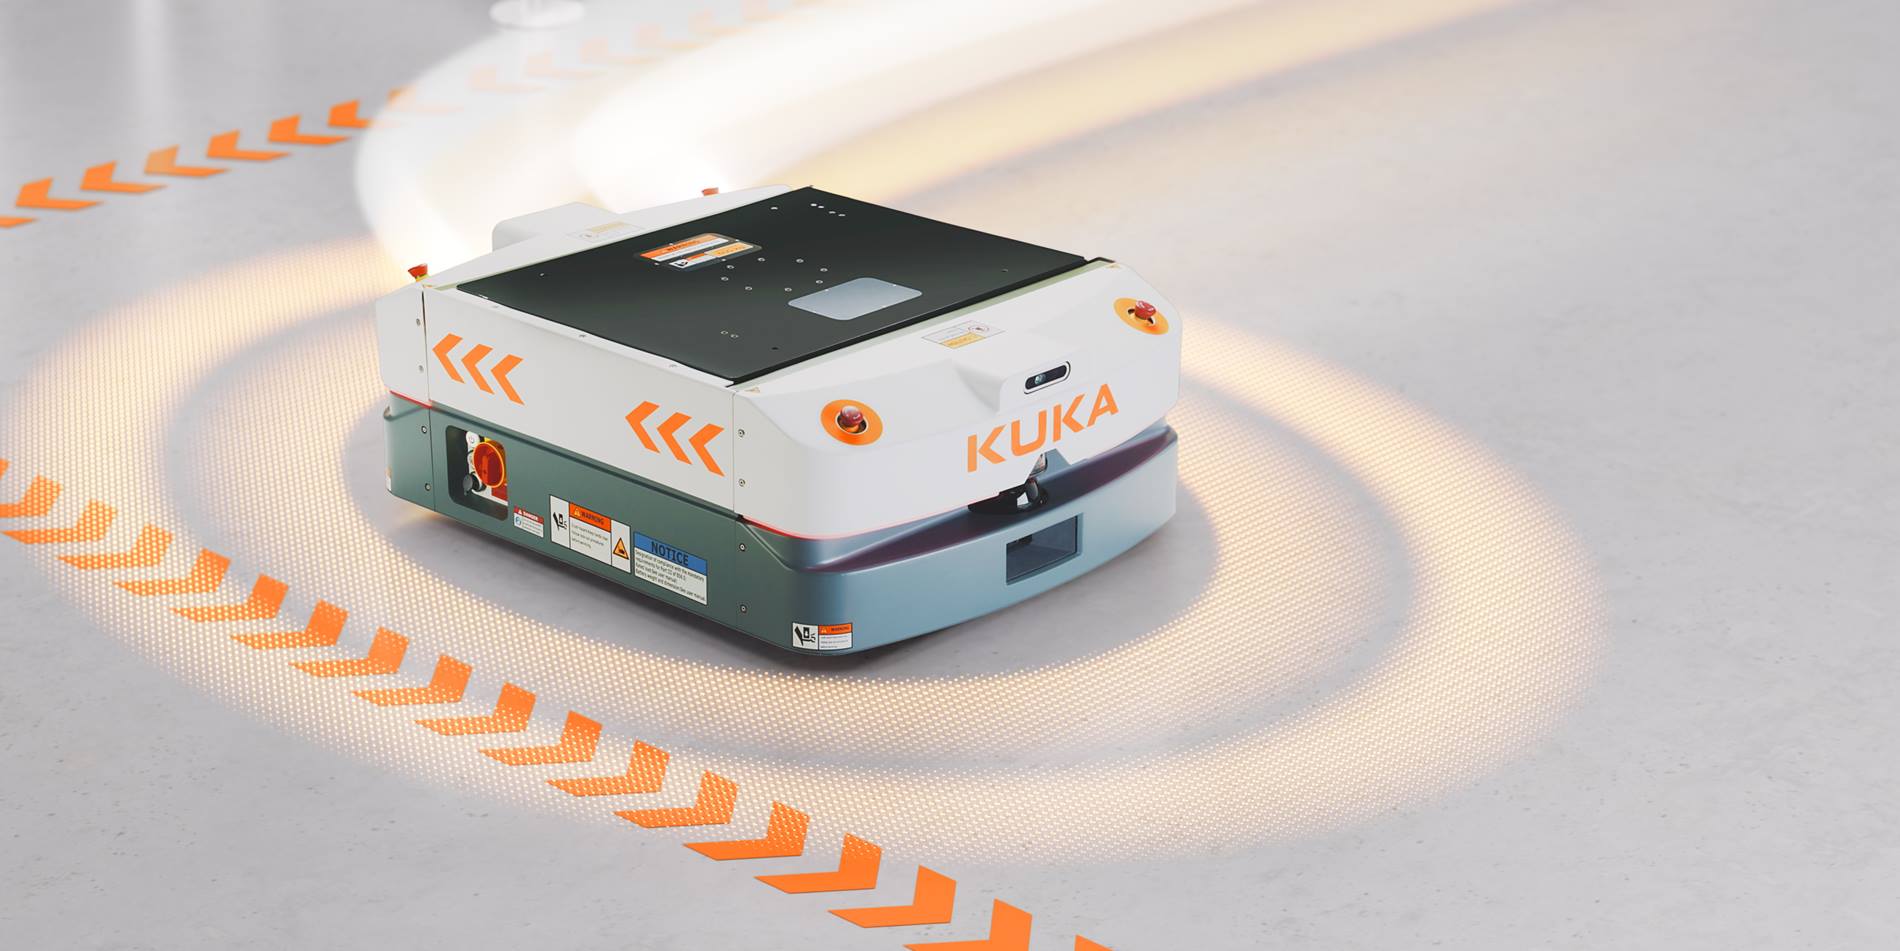 The new generation of the KMP 600-S diffDrive expands KUKA’s portfolio of mobile platforms.